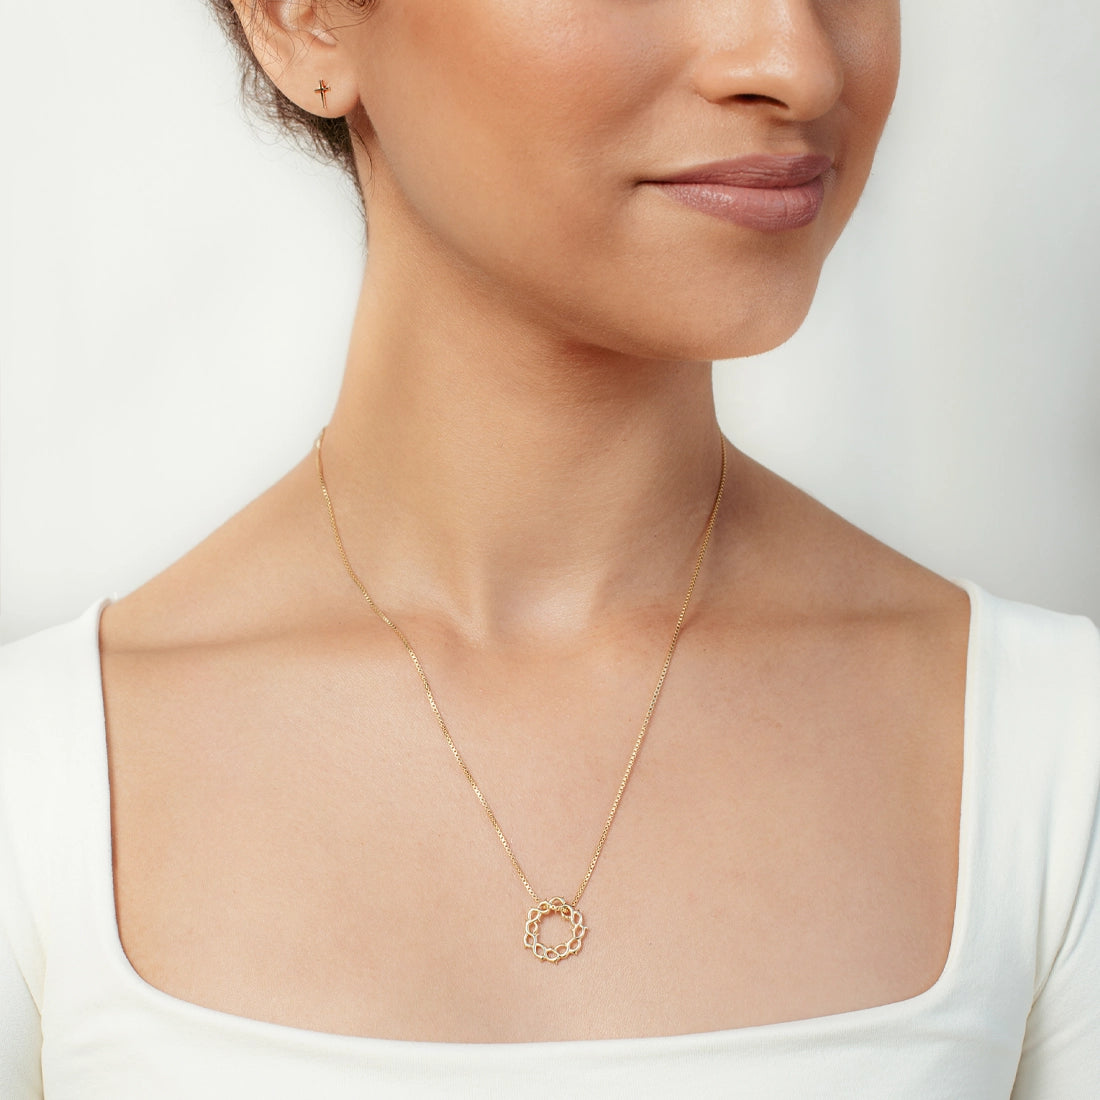 Christian woman wearing gold Crown of Thorns Necklace and Mini Cross Stud Earring from Rizen Jewelry